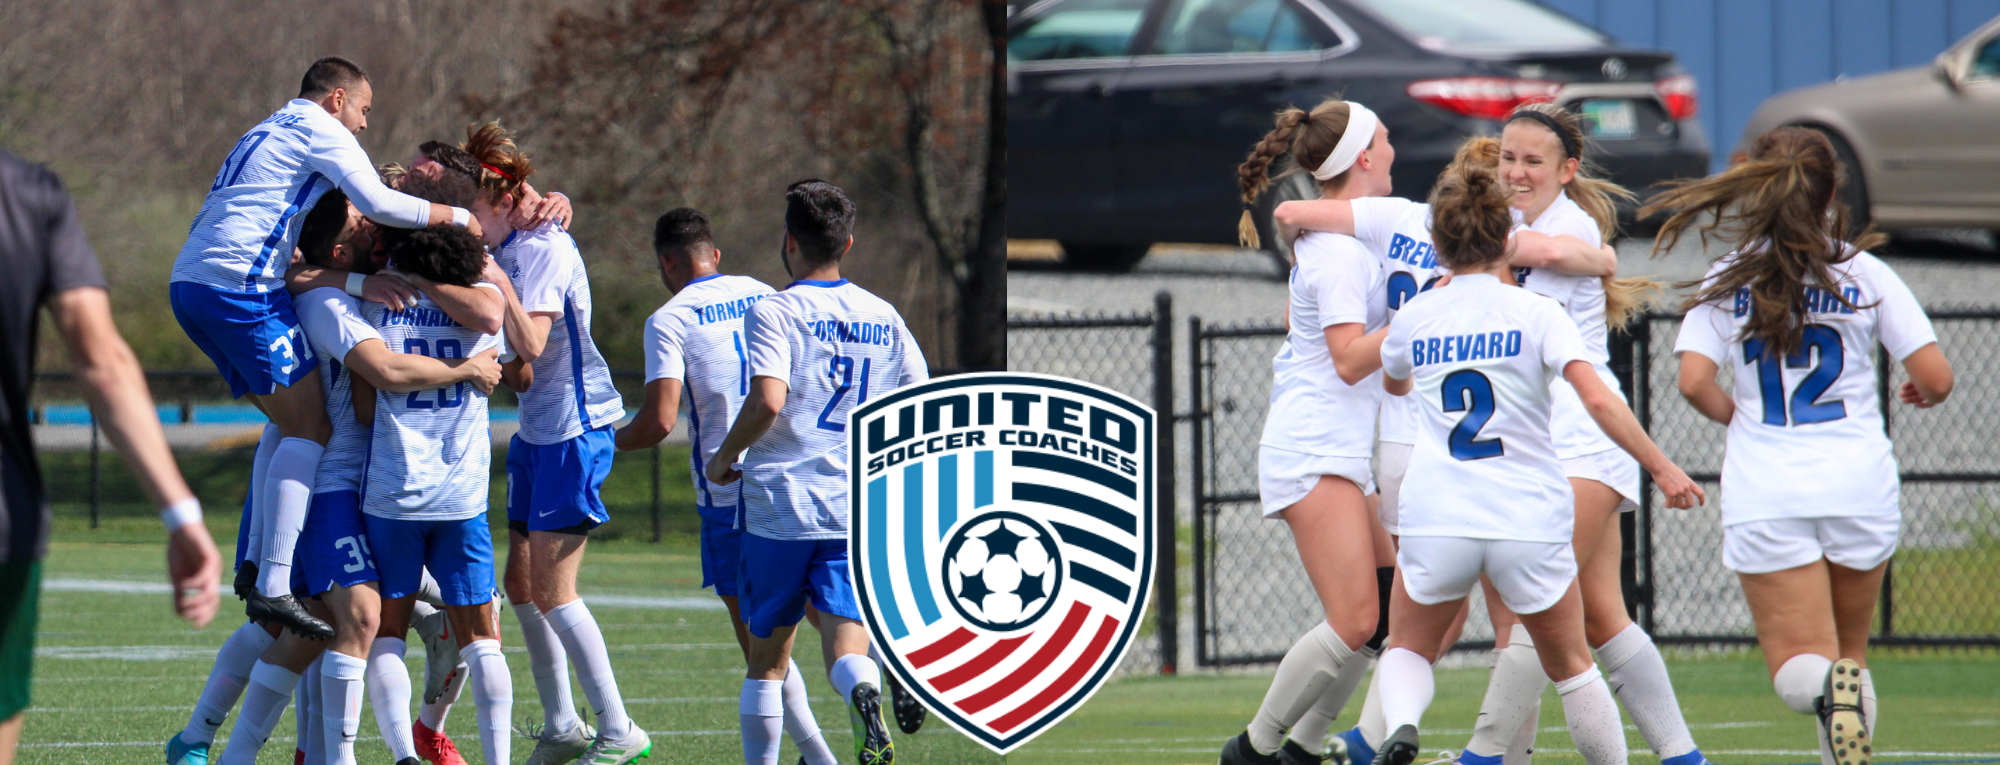 Brevard College 2020-21 Soccer Teams Recognized by United Soccer Coaches